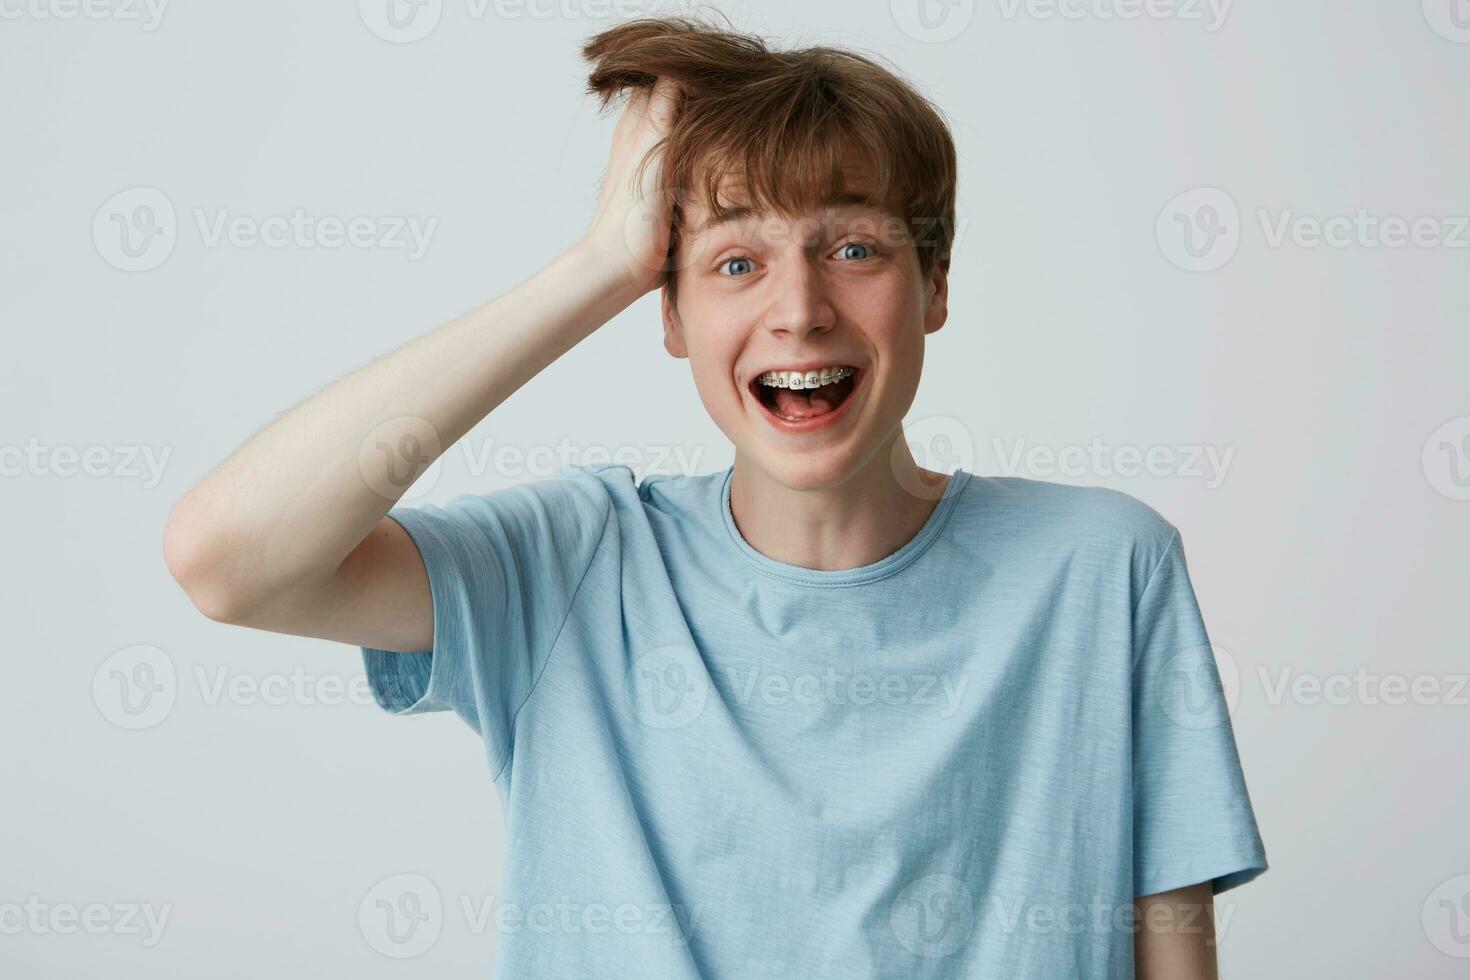 Screaming of happiness and excitement young guy clutched at his head with one hand, disheveled hair, mouth wide opened as shouting loud with braces on teeth, feels surprised over white background photo